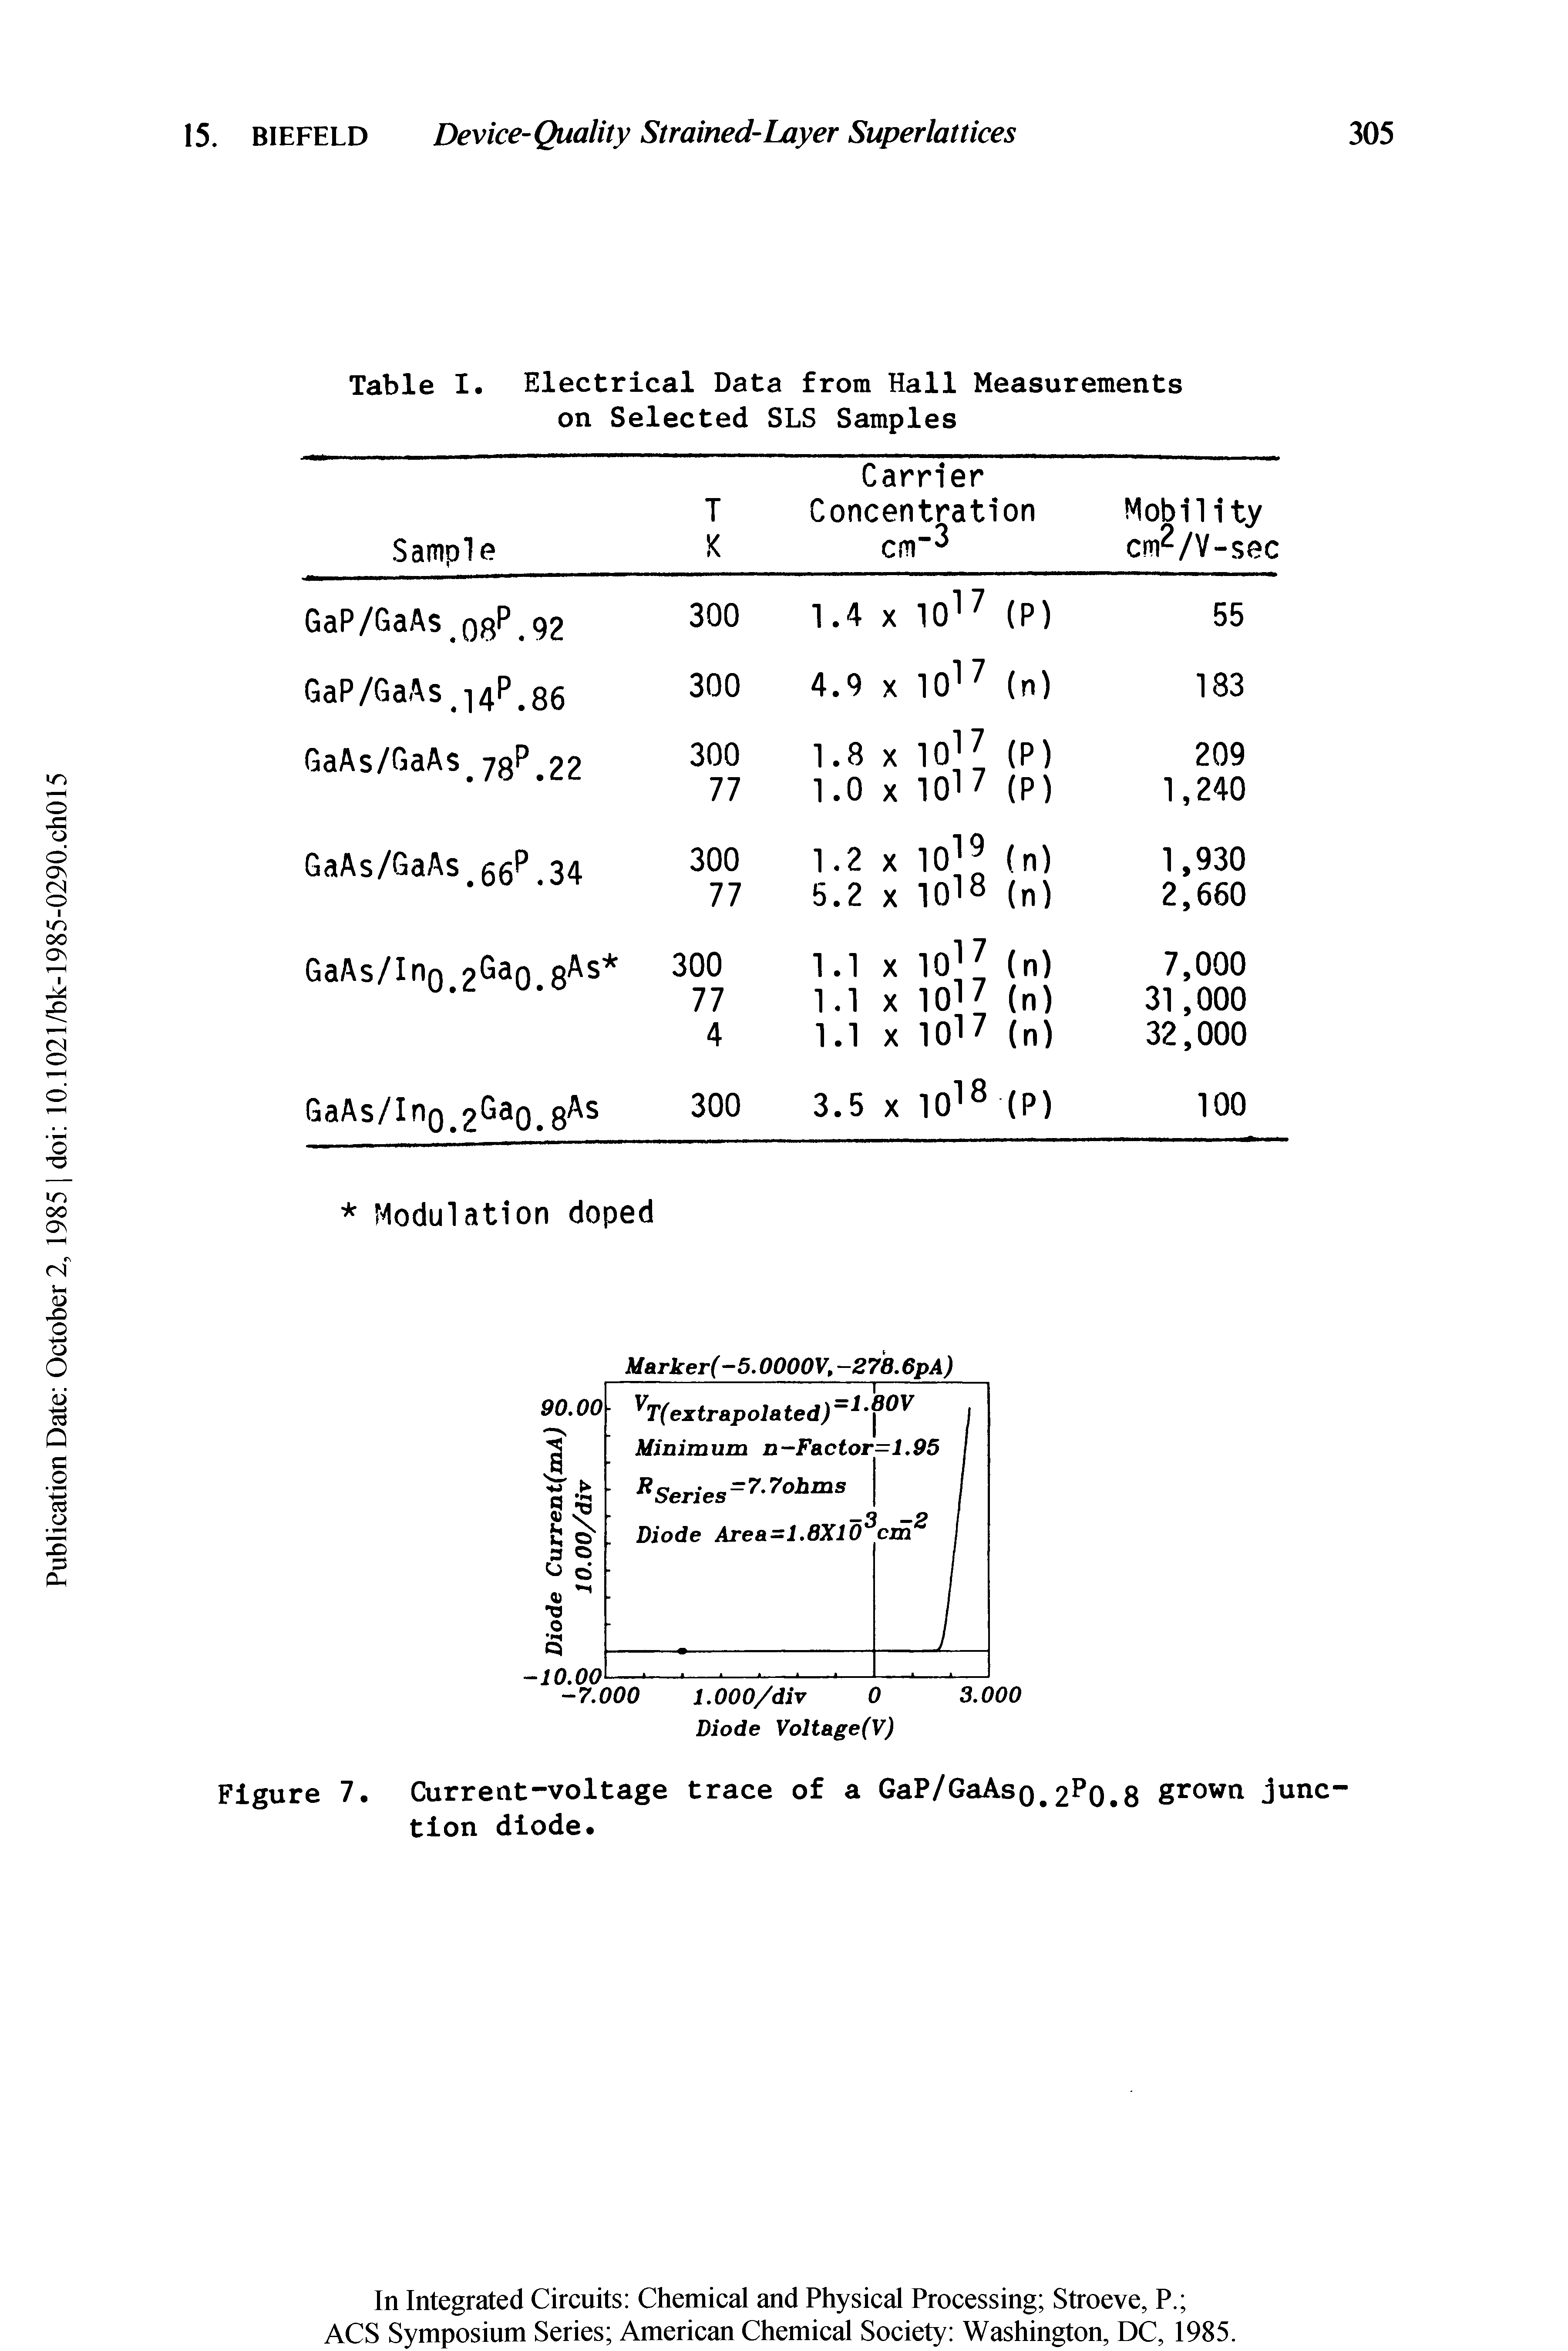 Table I. Electrical Data from Hall Measurements on Selected SLS Samples...